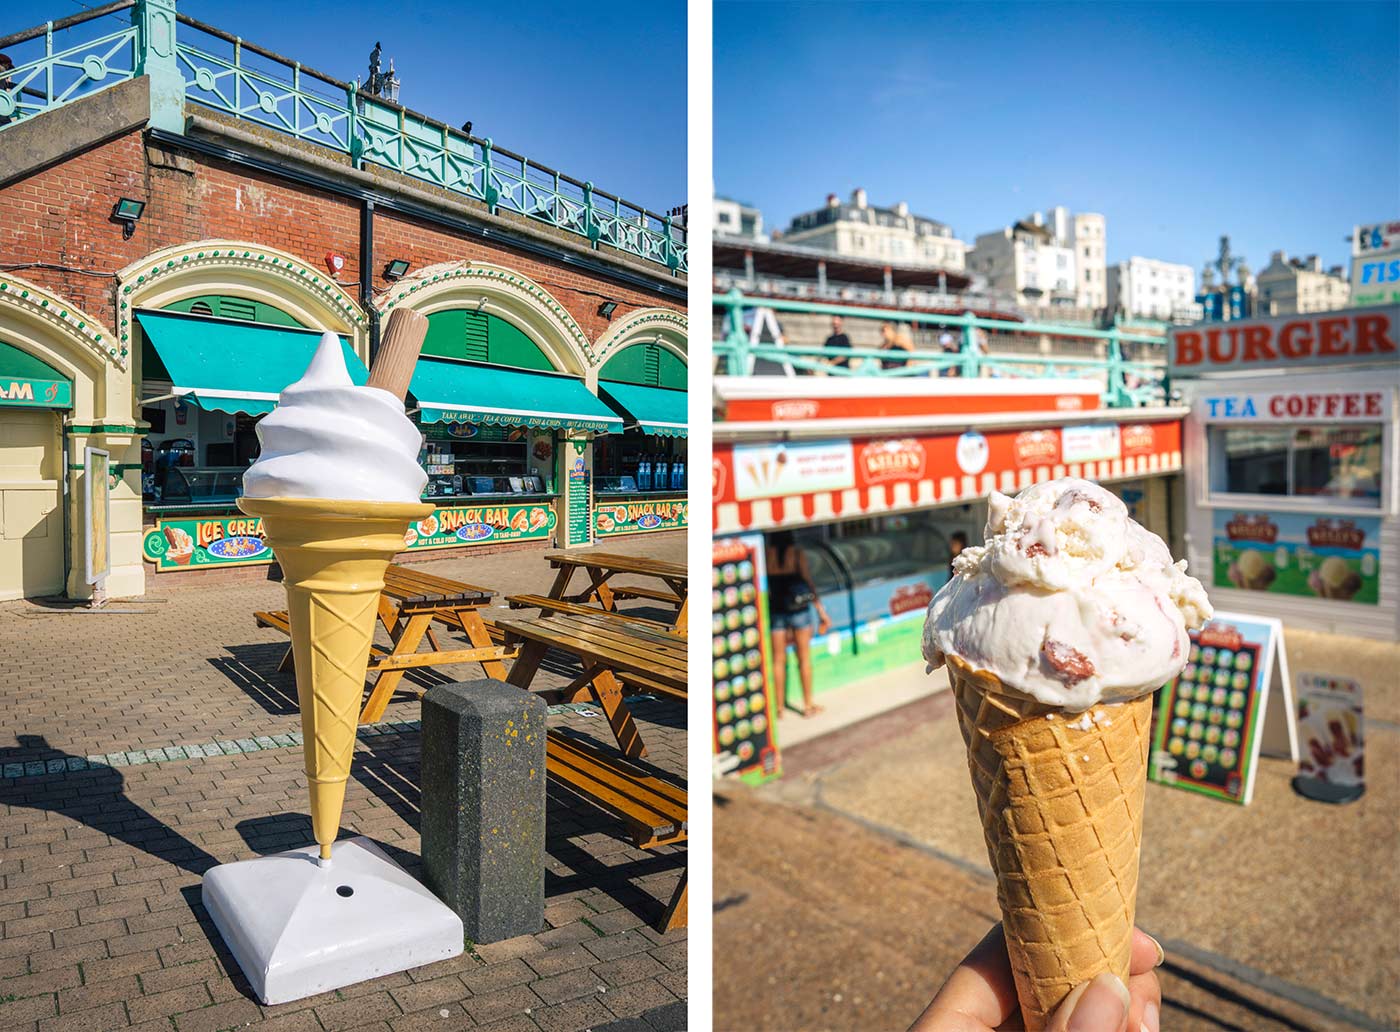 Things to do in Brighton - a day trip from London